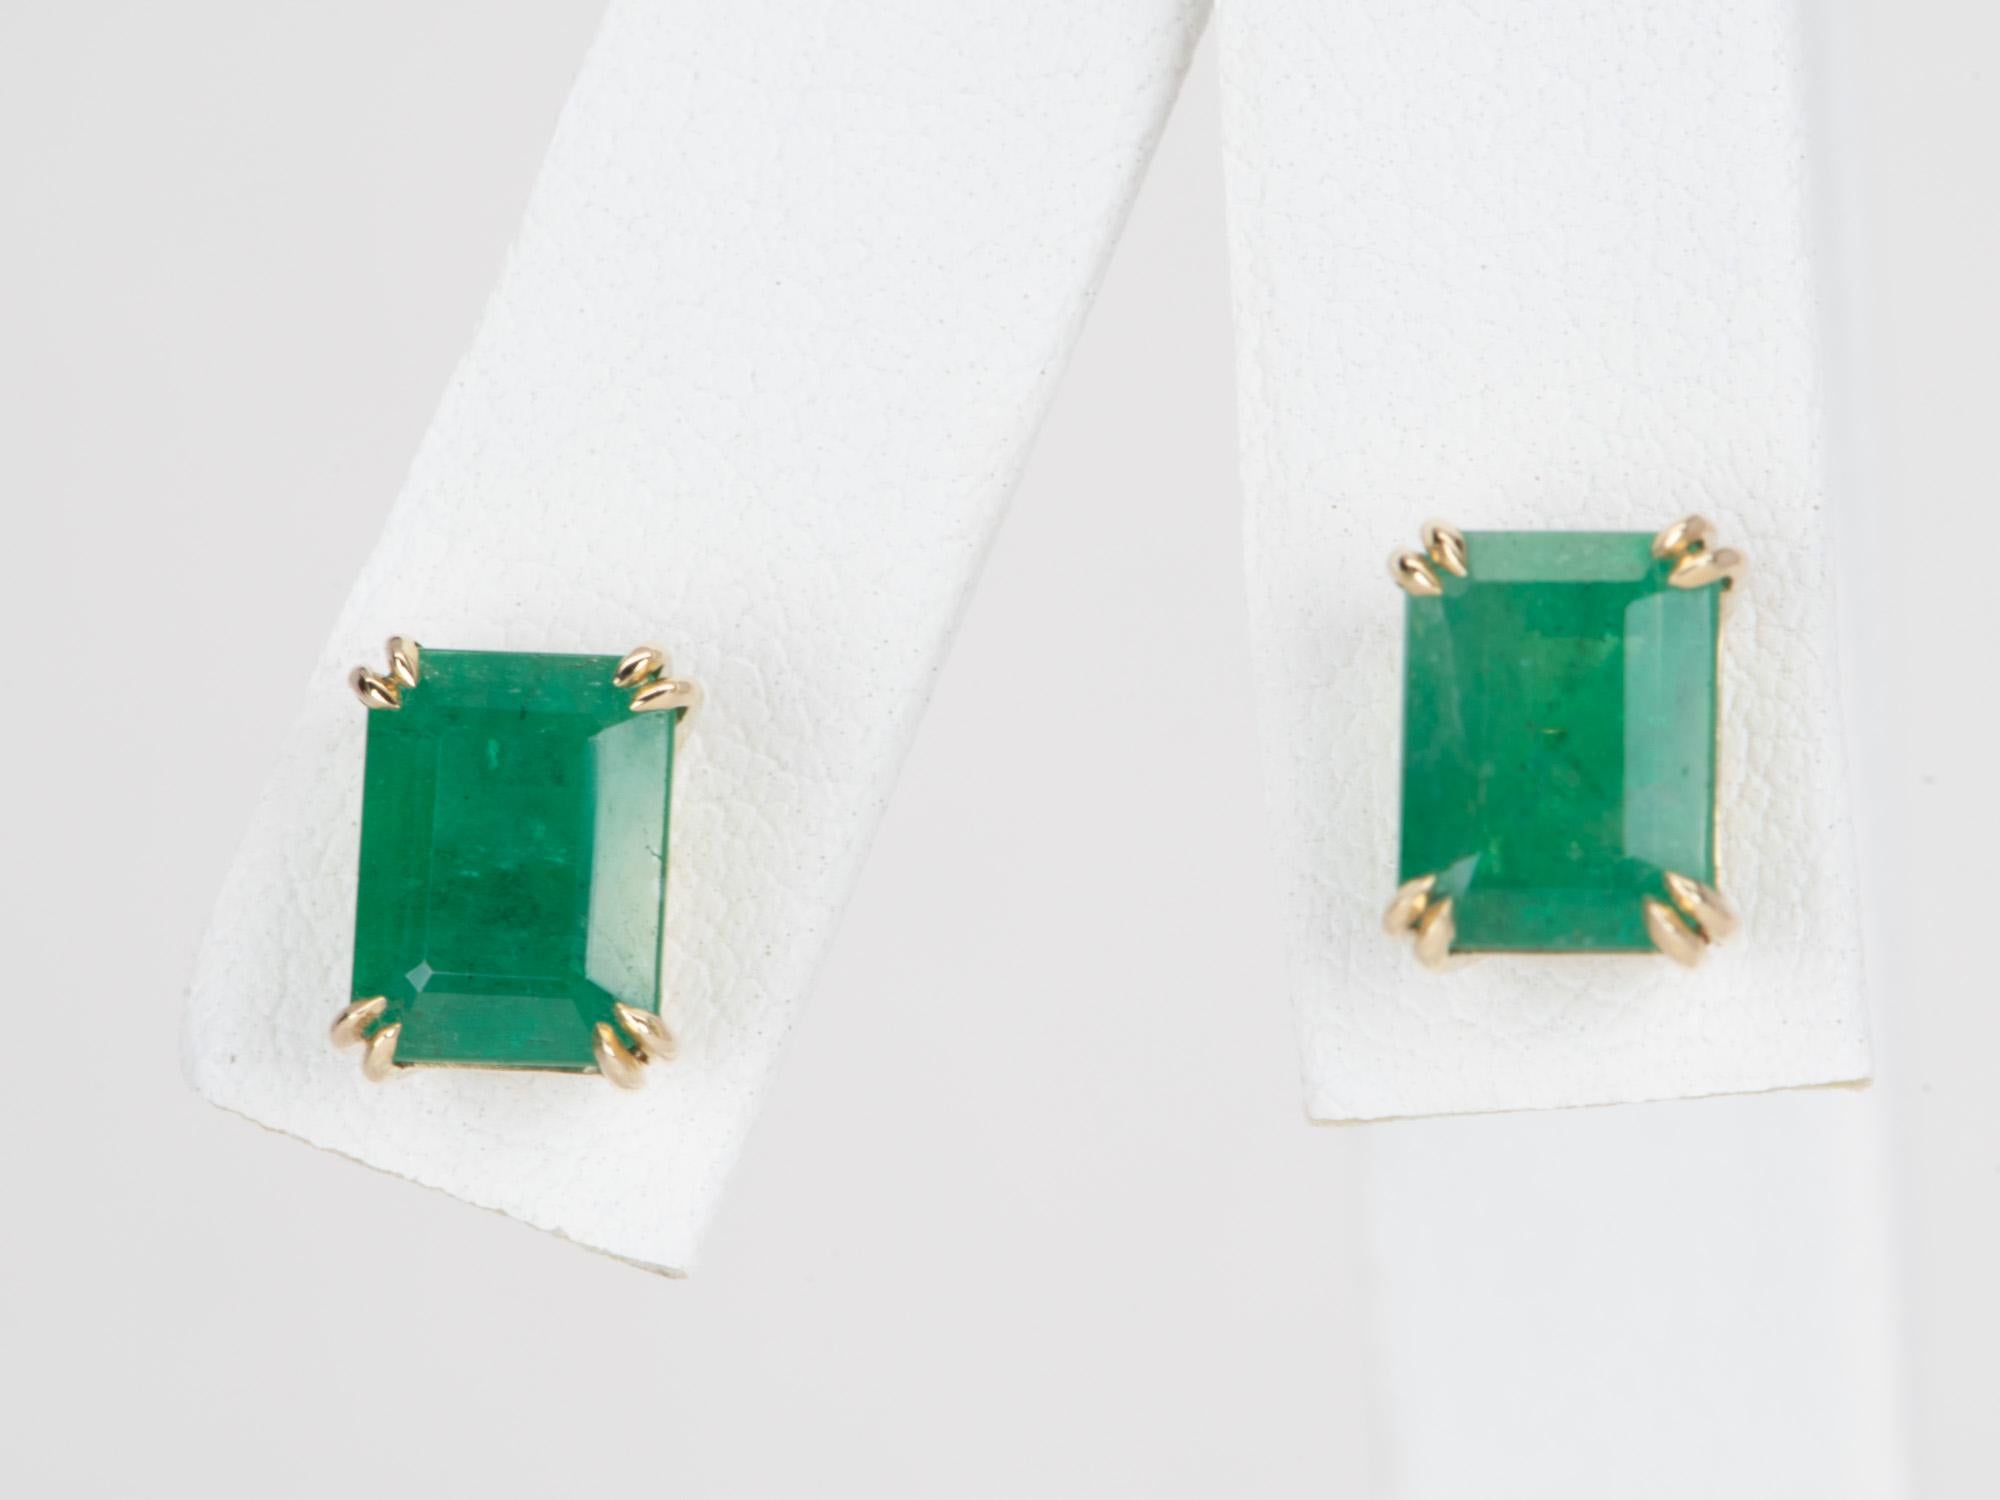 Adorn yourself with these stunning 3.33ct Rich Green Emerald Stud Earrings! Crafted from 14K Gold, these lustrous green beauties will add a touch of classic sophistication to any look. Perfect for any occasion, these earrings will have everyone